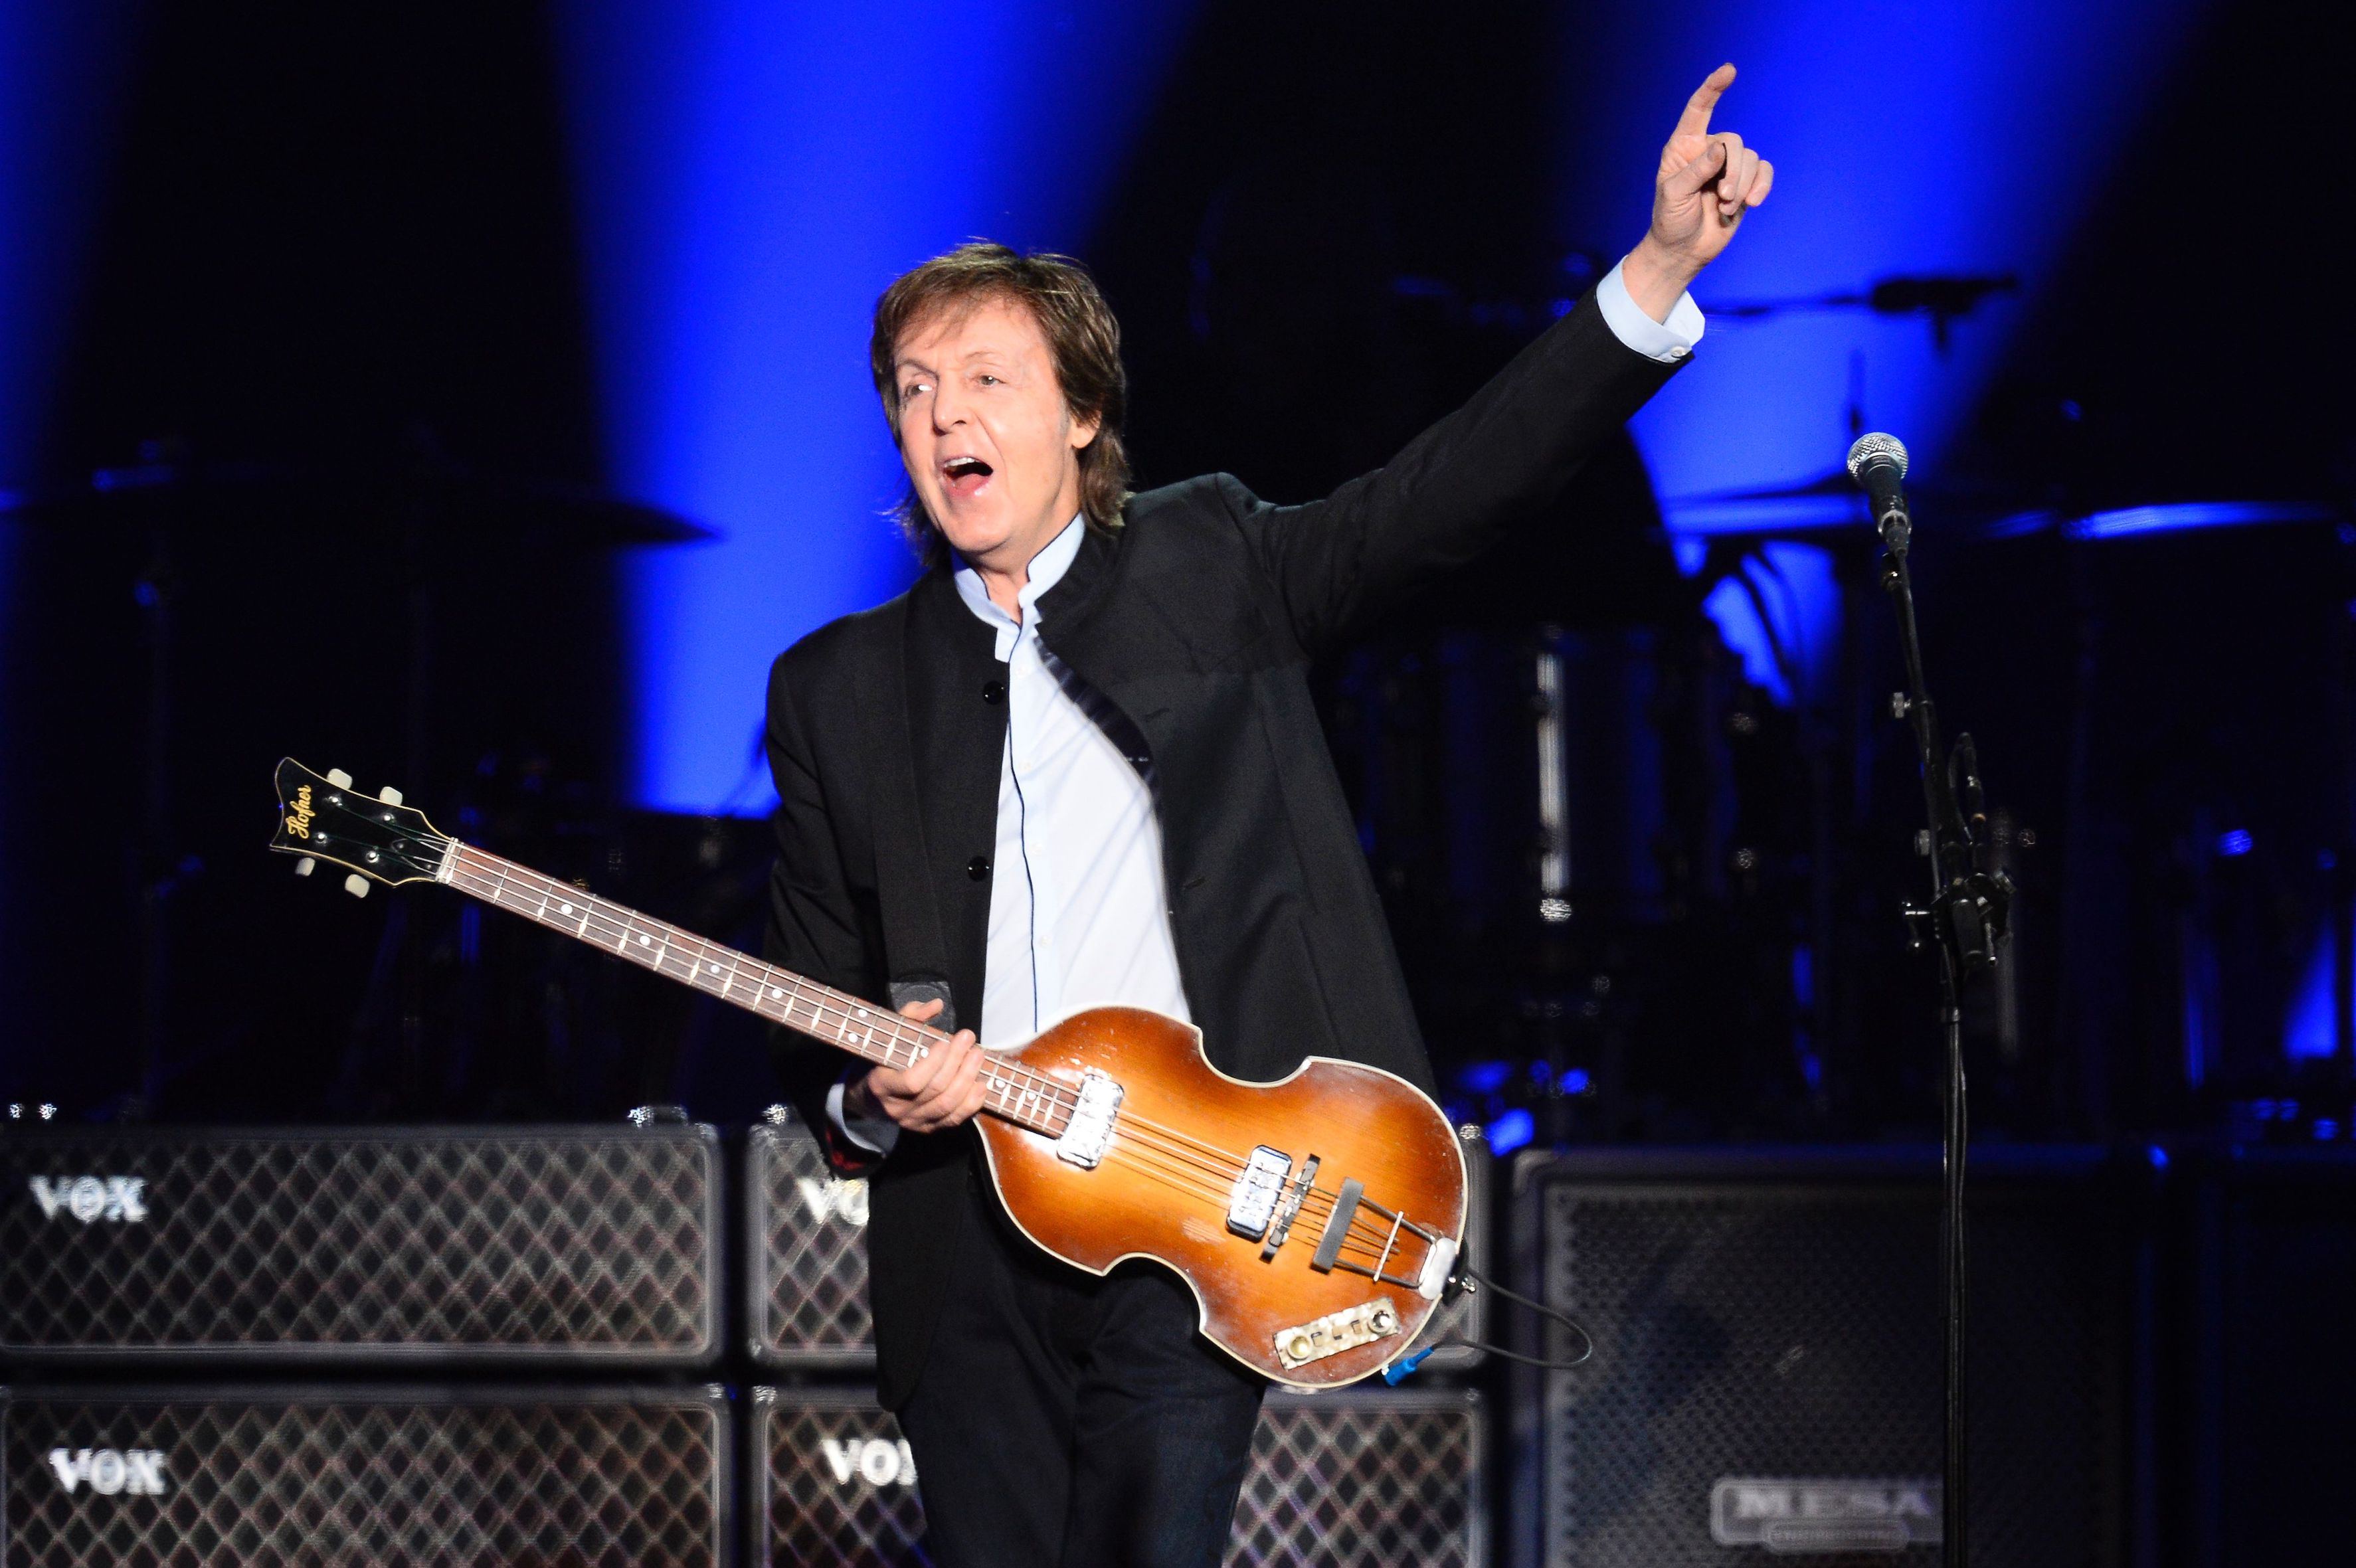 Paul McCartney performs on stage at the Bercy stadium in Paris